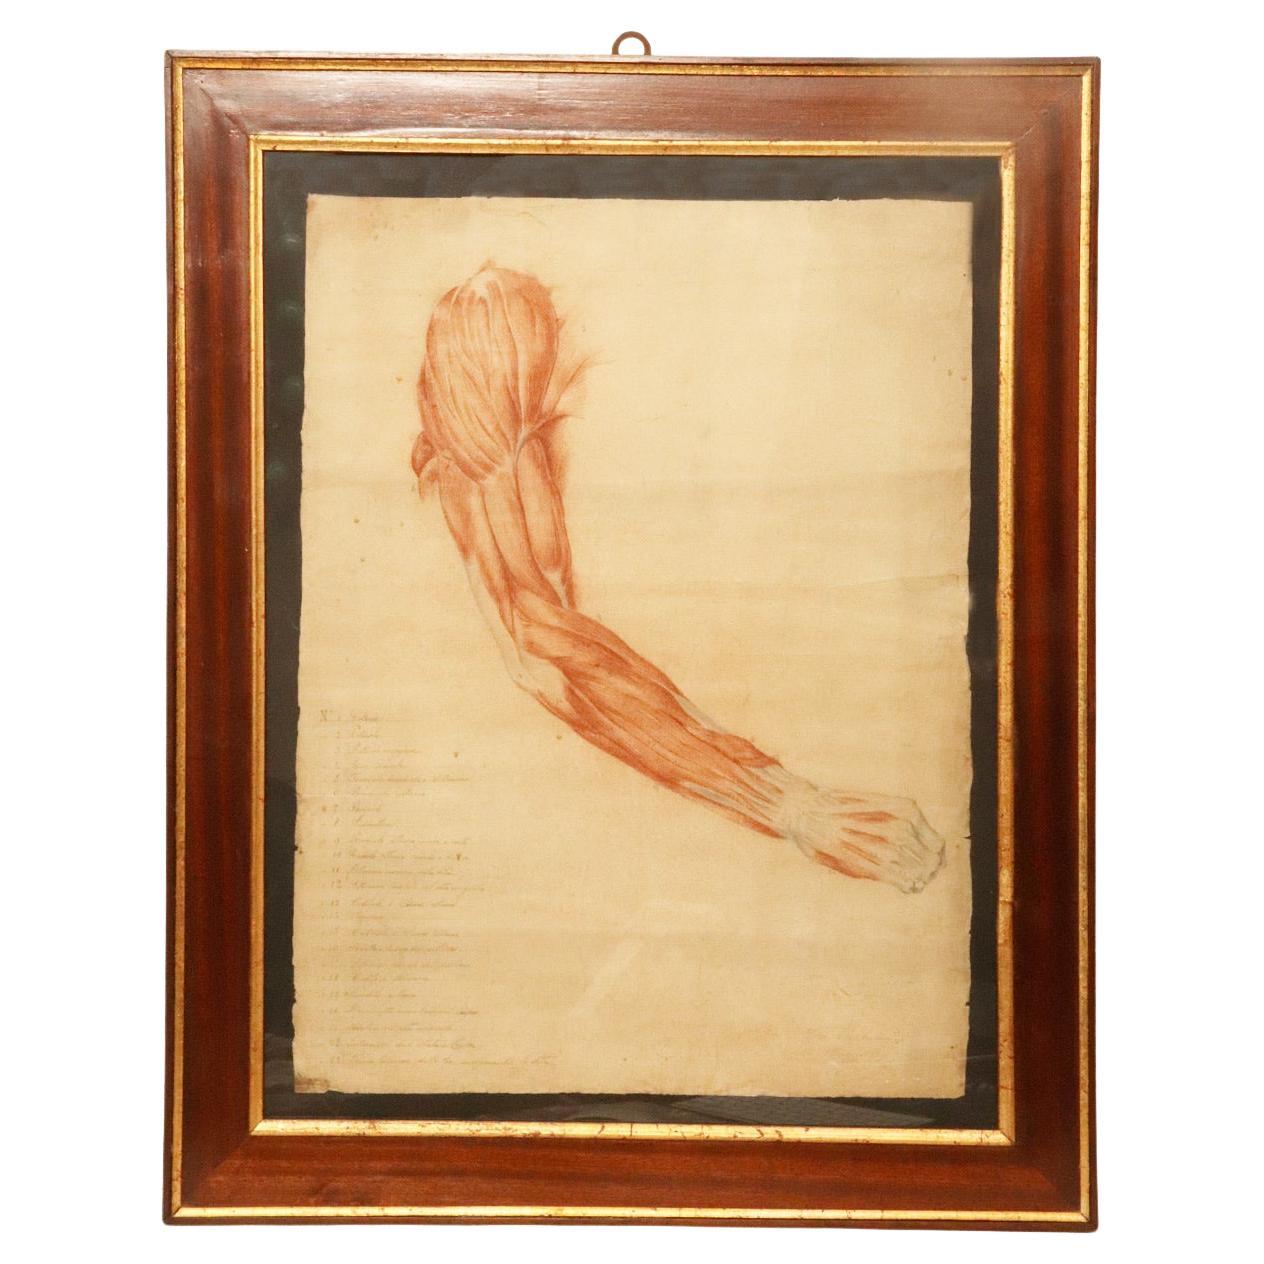 Anatomical drawing of an upper limb, made in pencil and sanguine, Italy 1889. For Sale